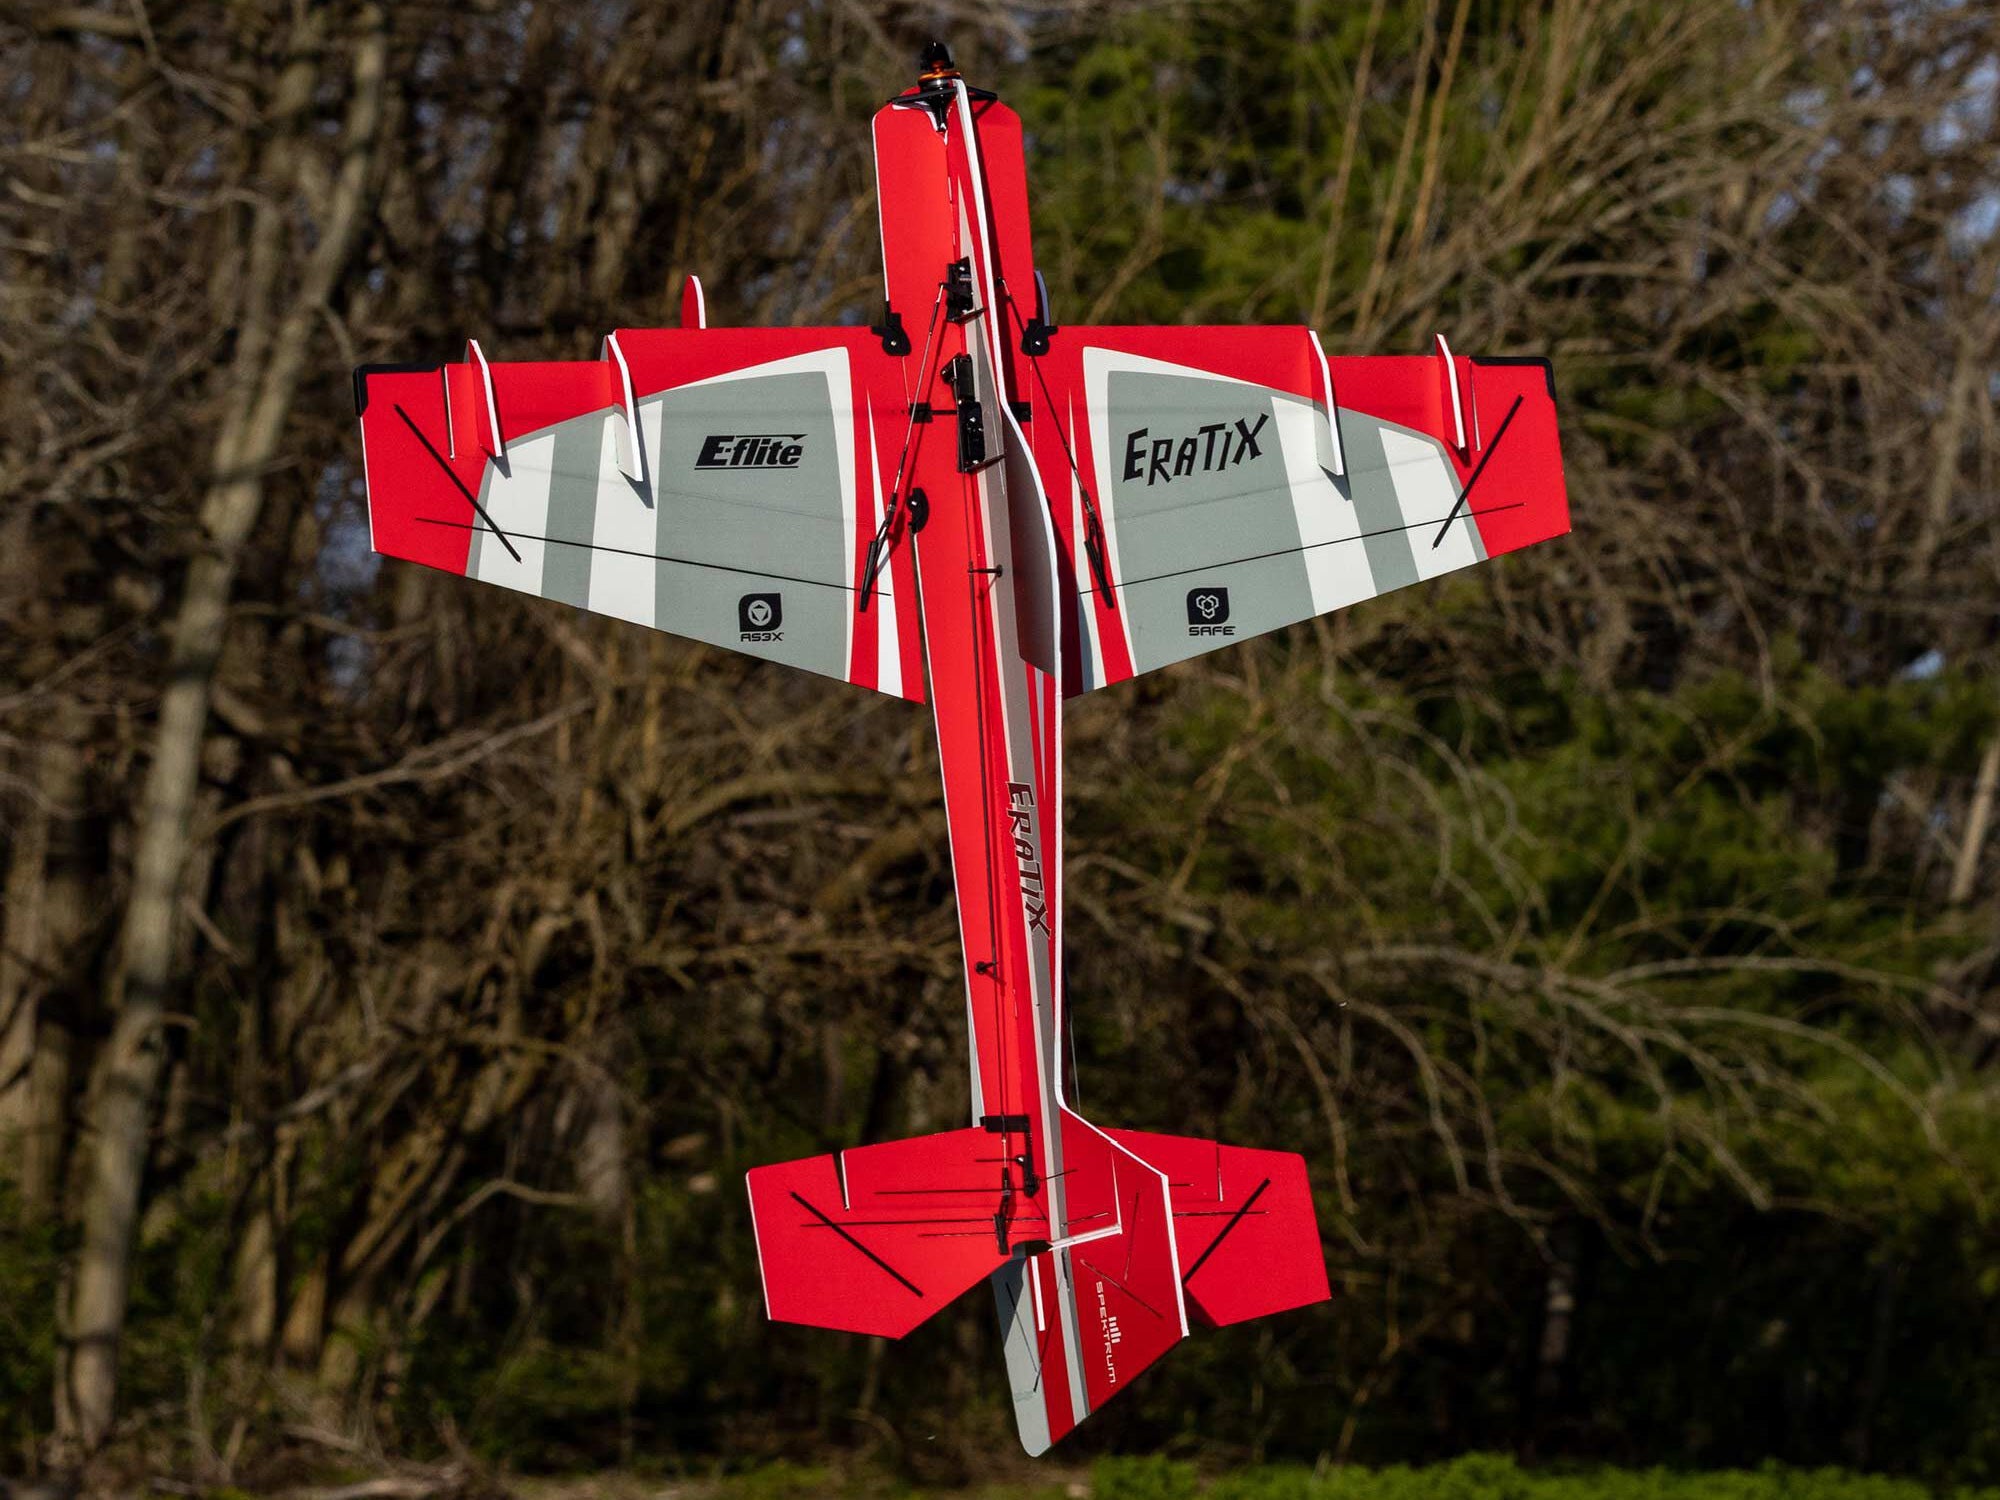 E-Flite Eratix 3D FF (Flat Foamy) 860mm BNF Basic with AS3X and SAFE Select EFL01950